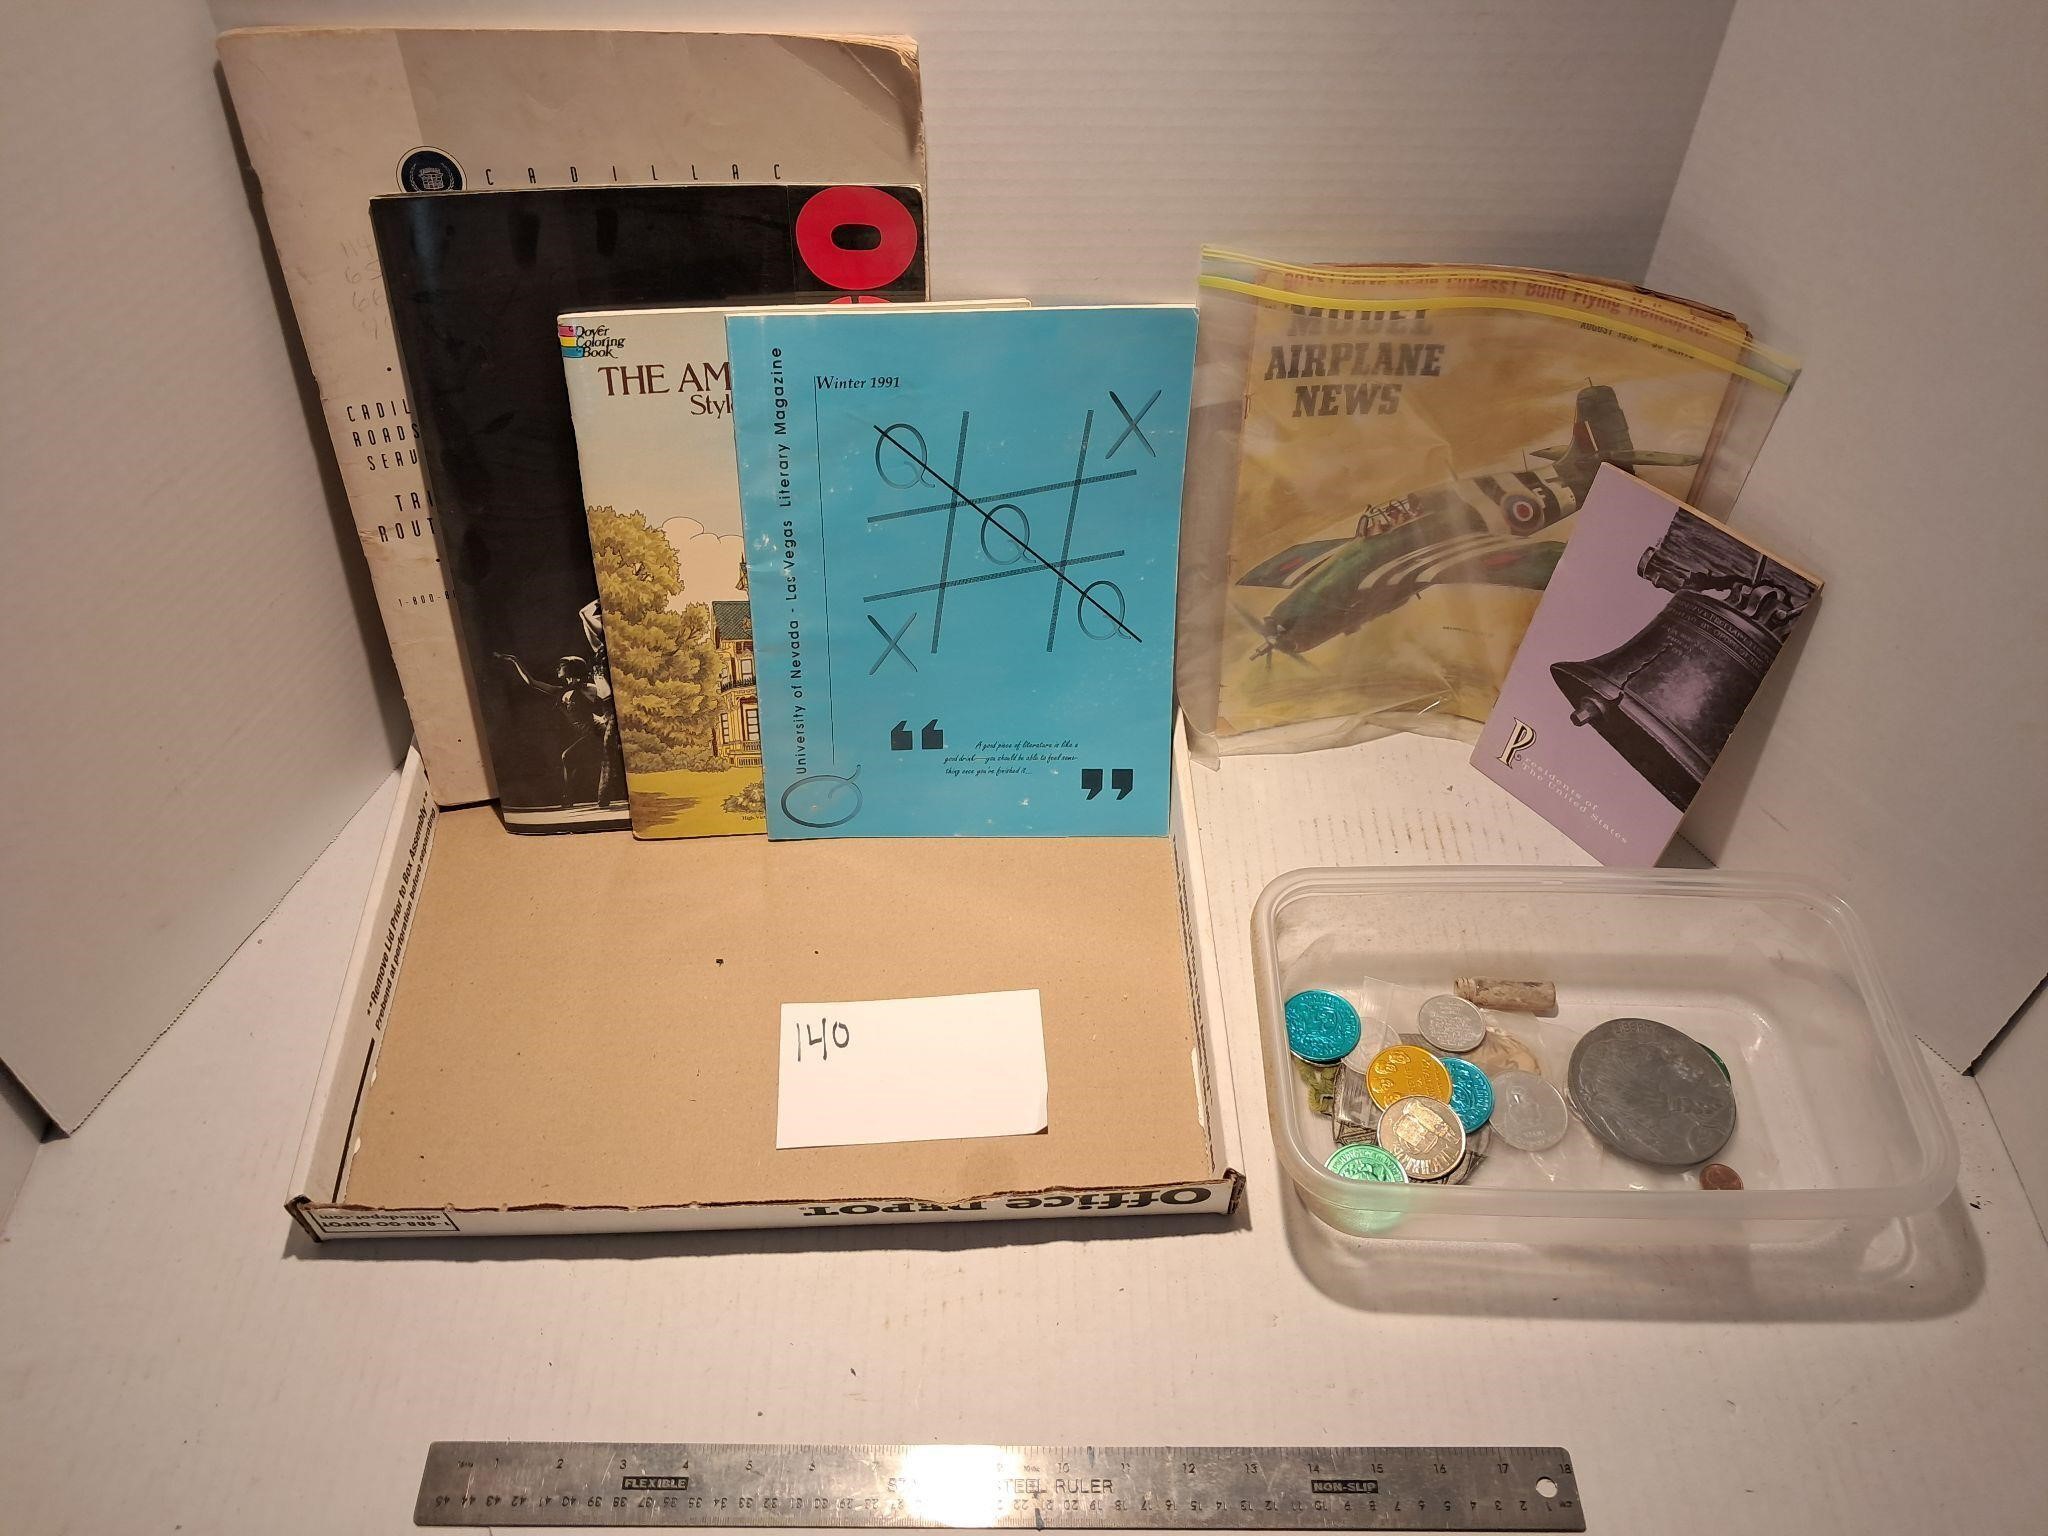 Cadilac Atlas, Magazines and coins